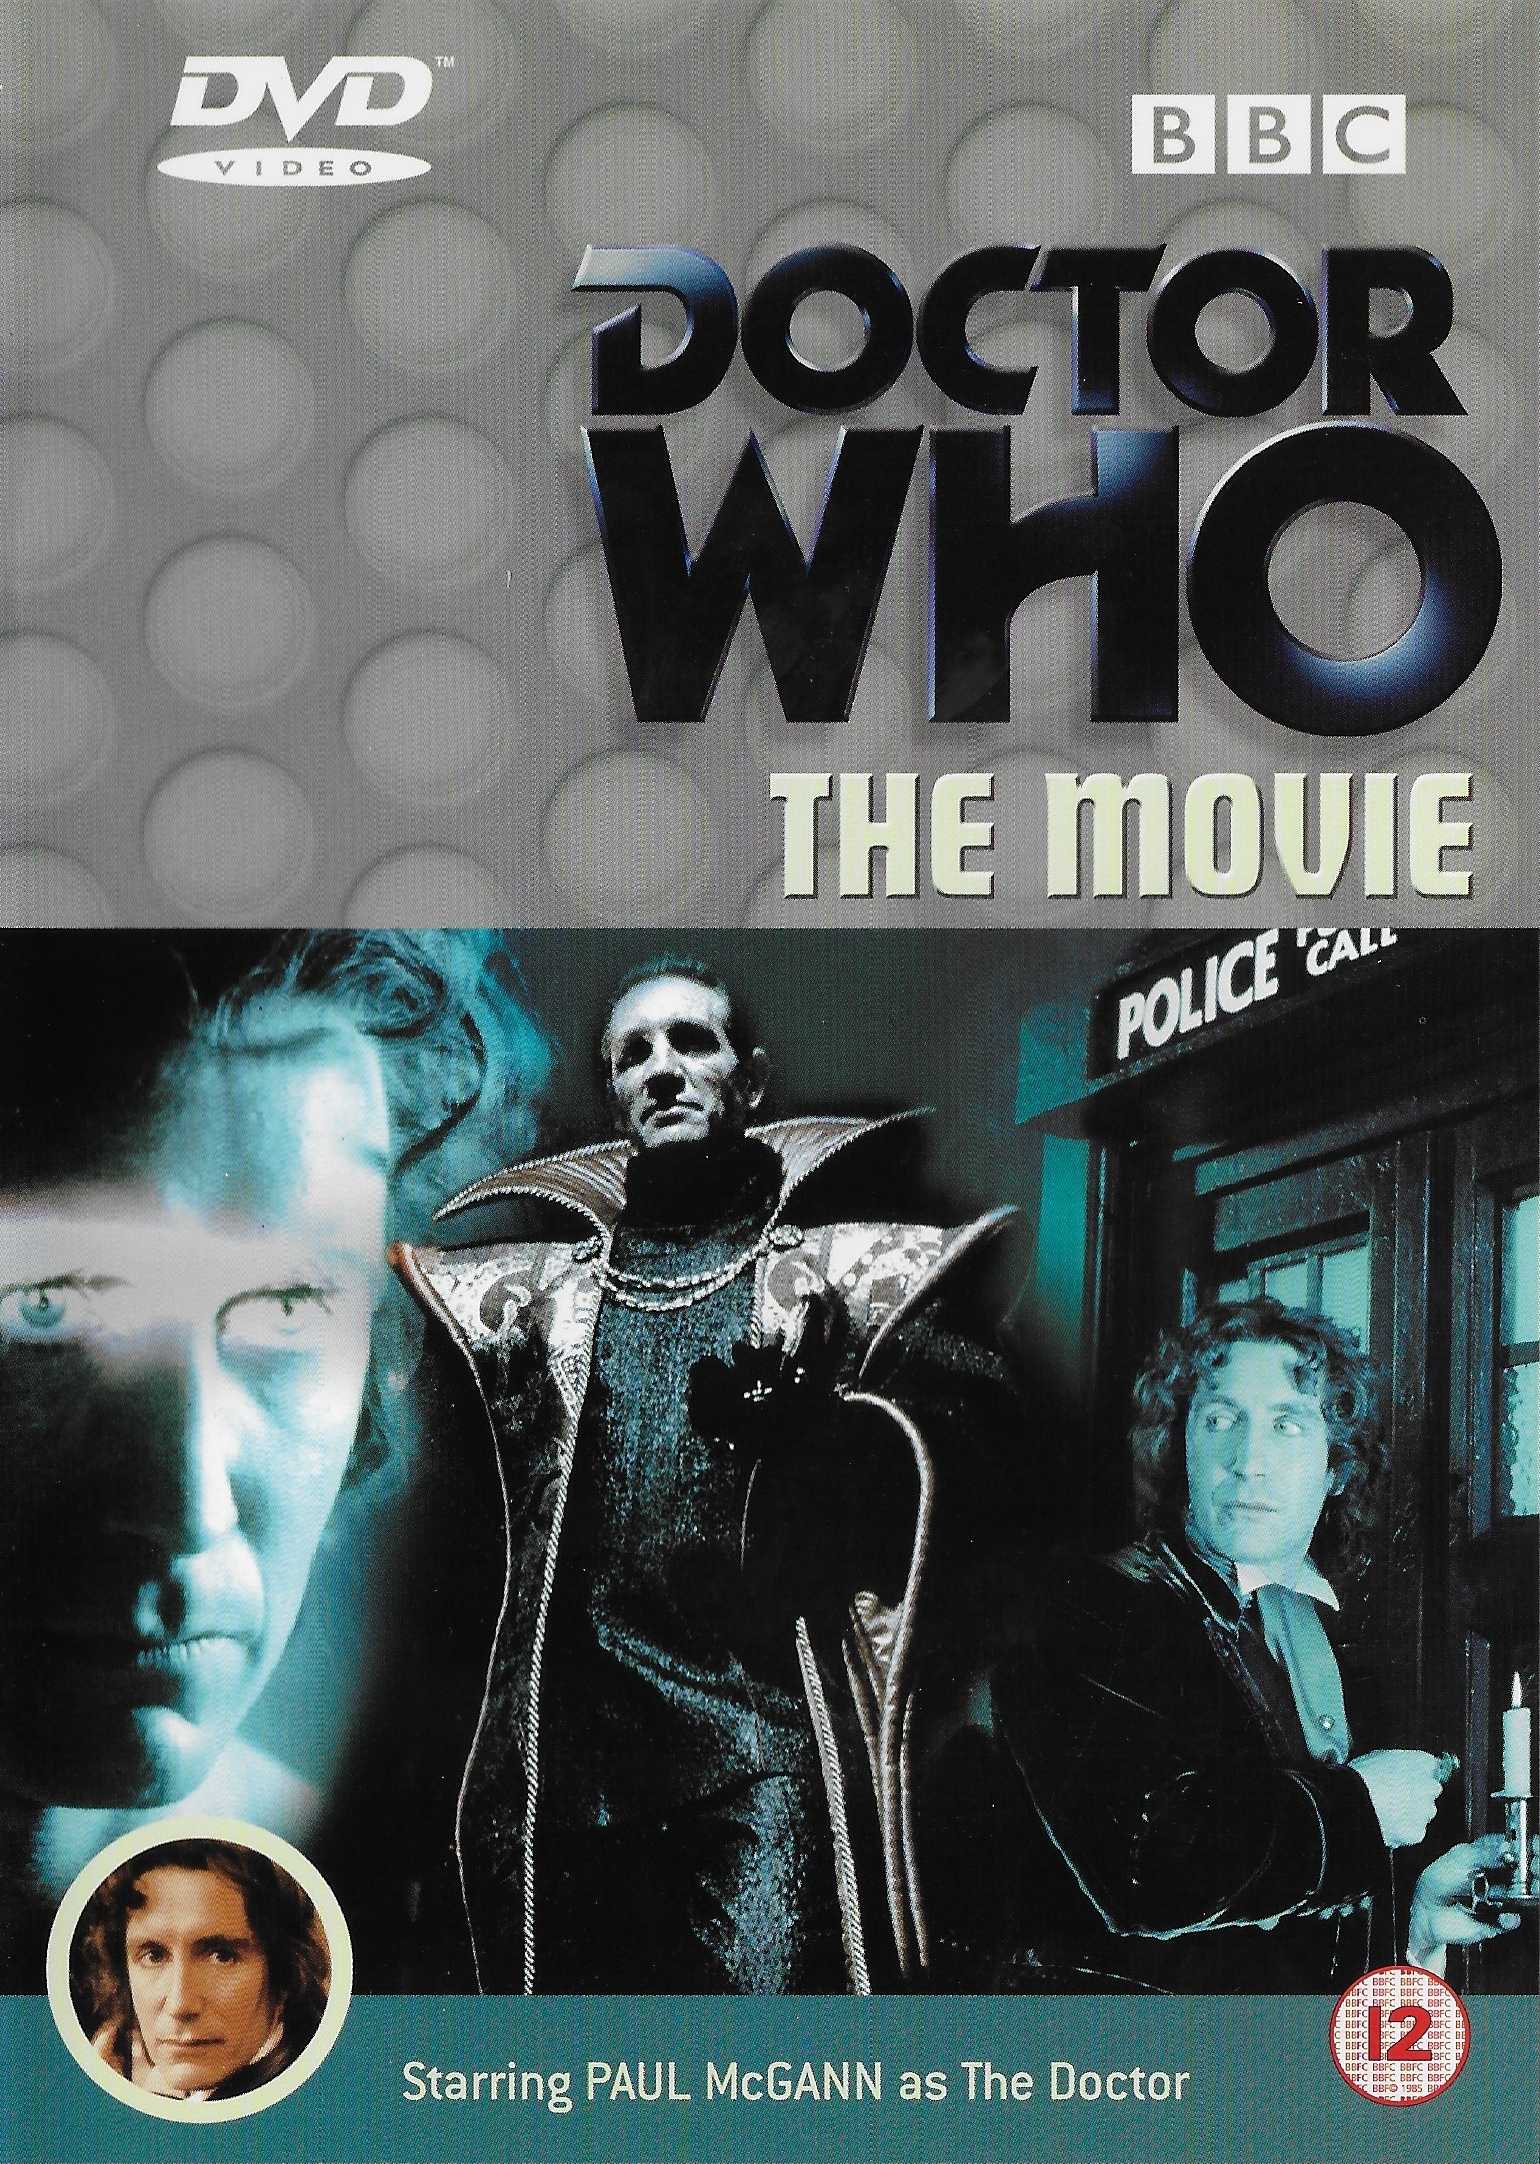 Picture of Doctor Who - The movie by artist Matthew Jacobs from the BBC dvds - Records and Tapes library